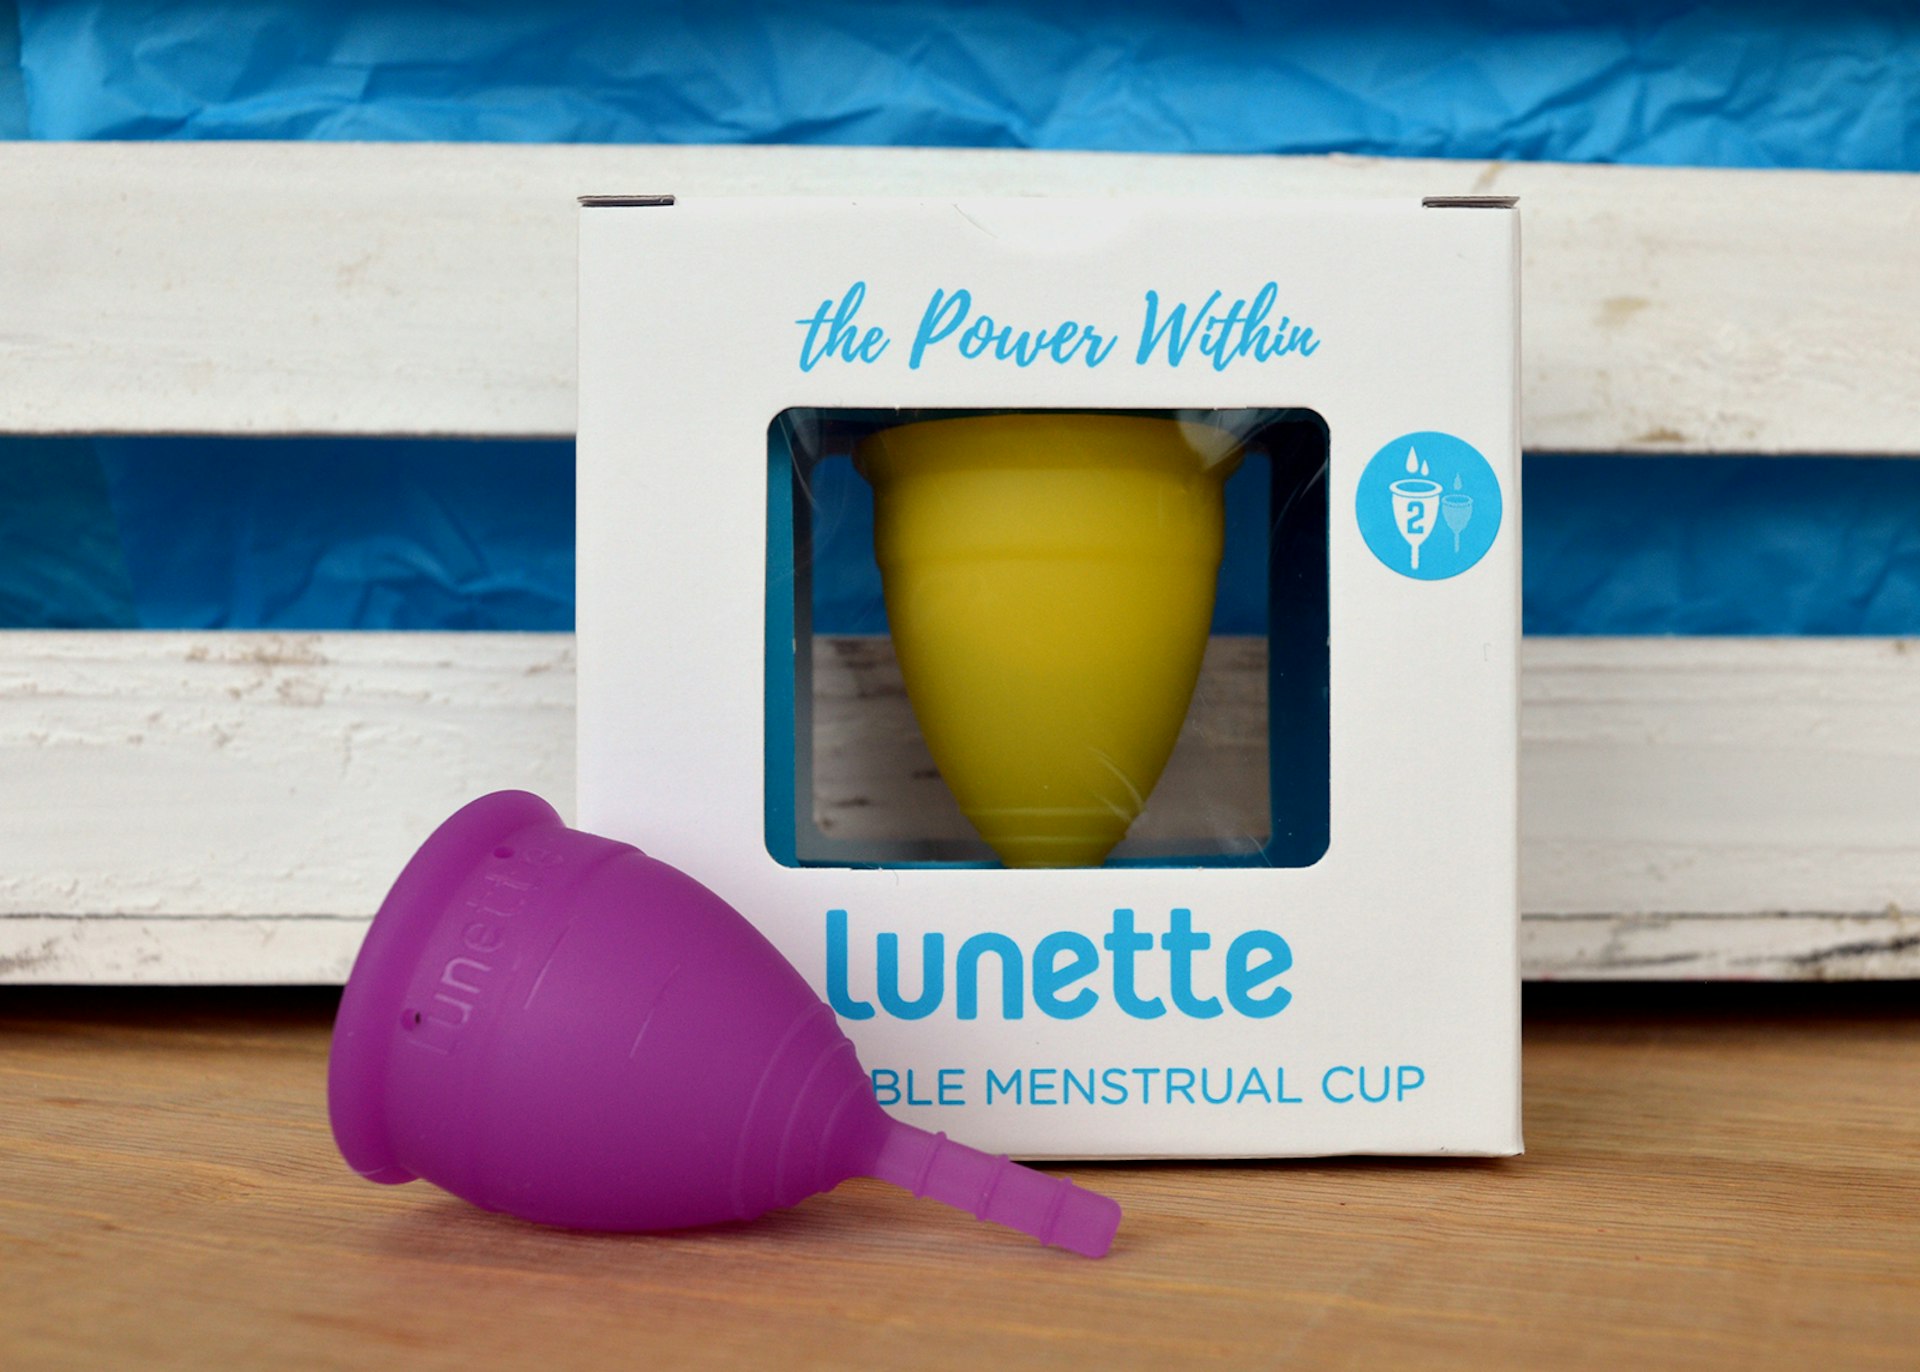 Lunette, a reusable menstrual cup © Emma Sparks / Lonely Planet